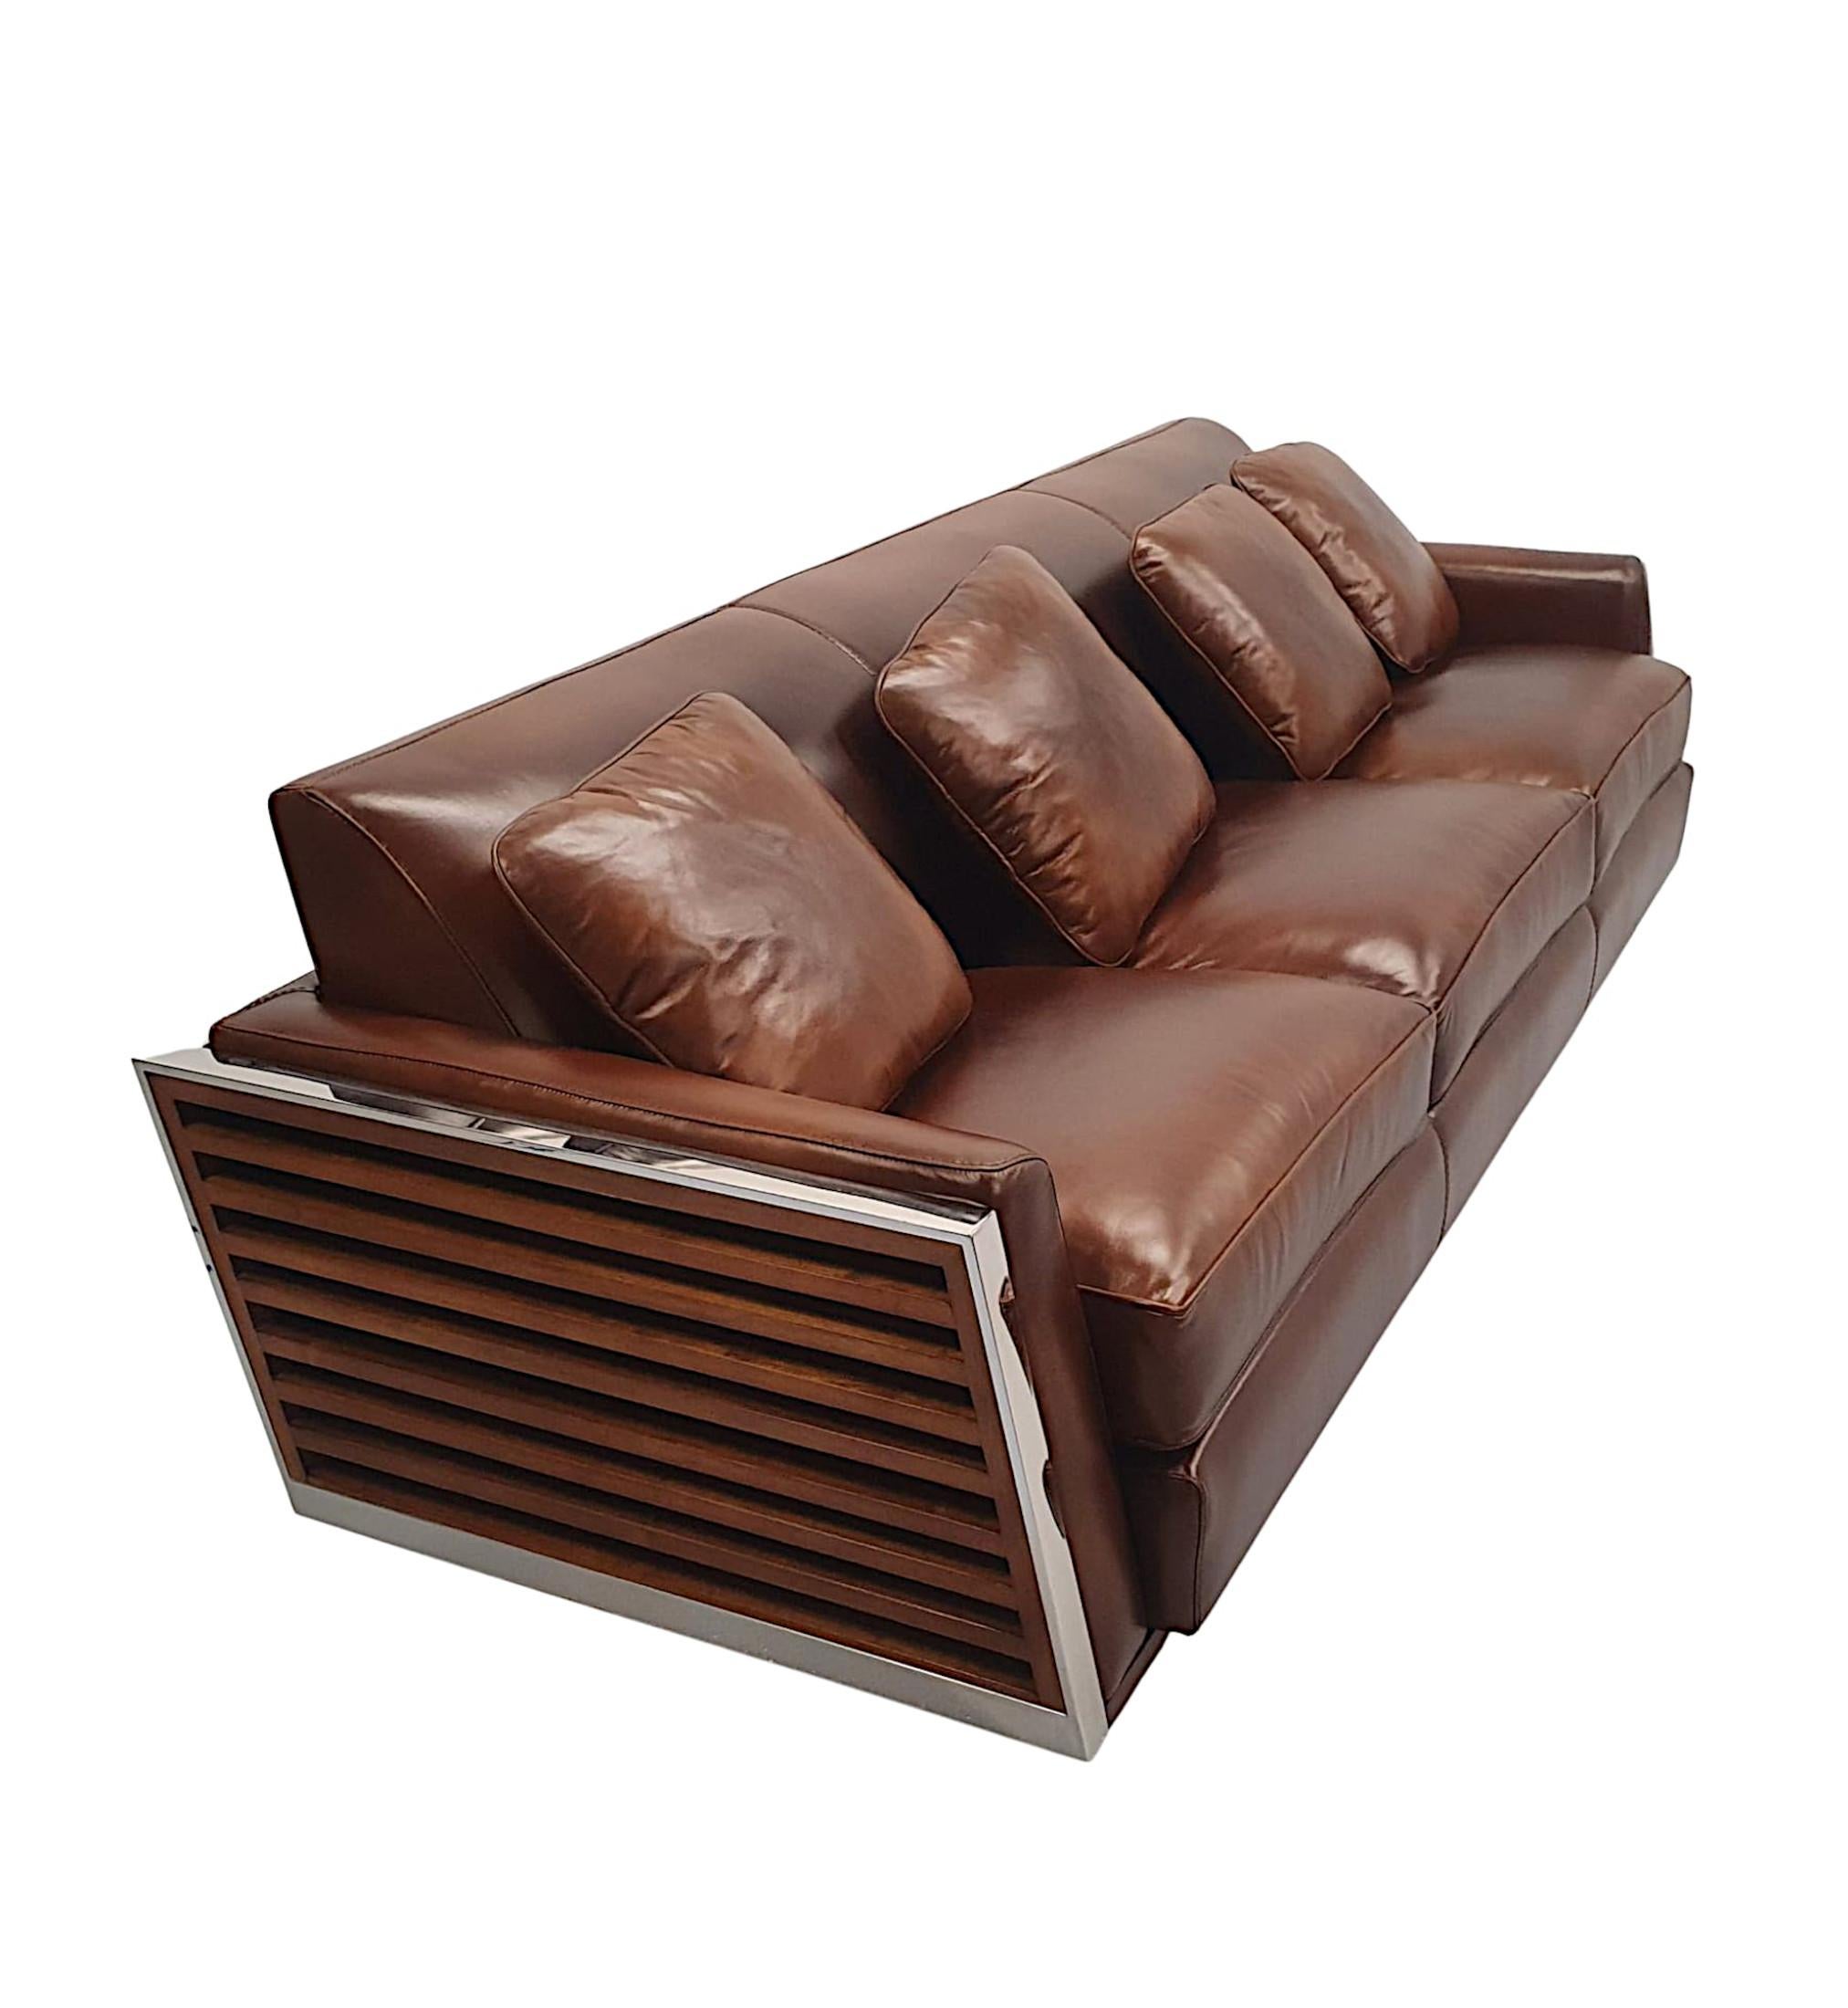 A fabulous three seater leather and chrome framed contemporary sofa in the Art Deco style, of gorgeous quality and beautifully unholstered in elegant brown leather with matching cushions, set within a stunning pierced chrome frame, supported on